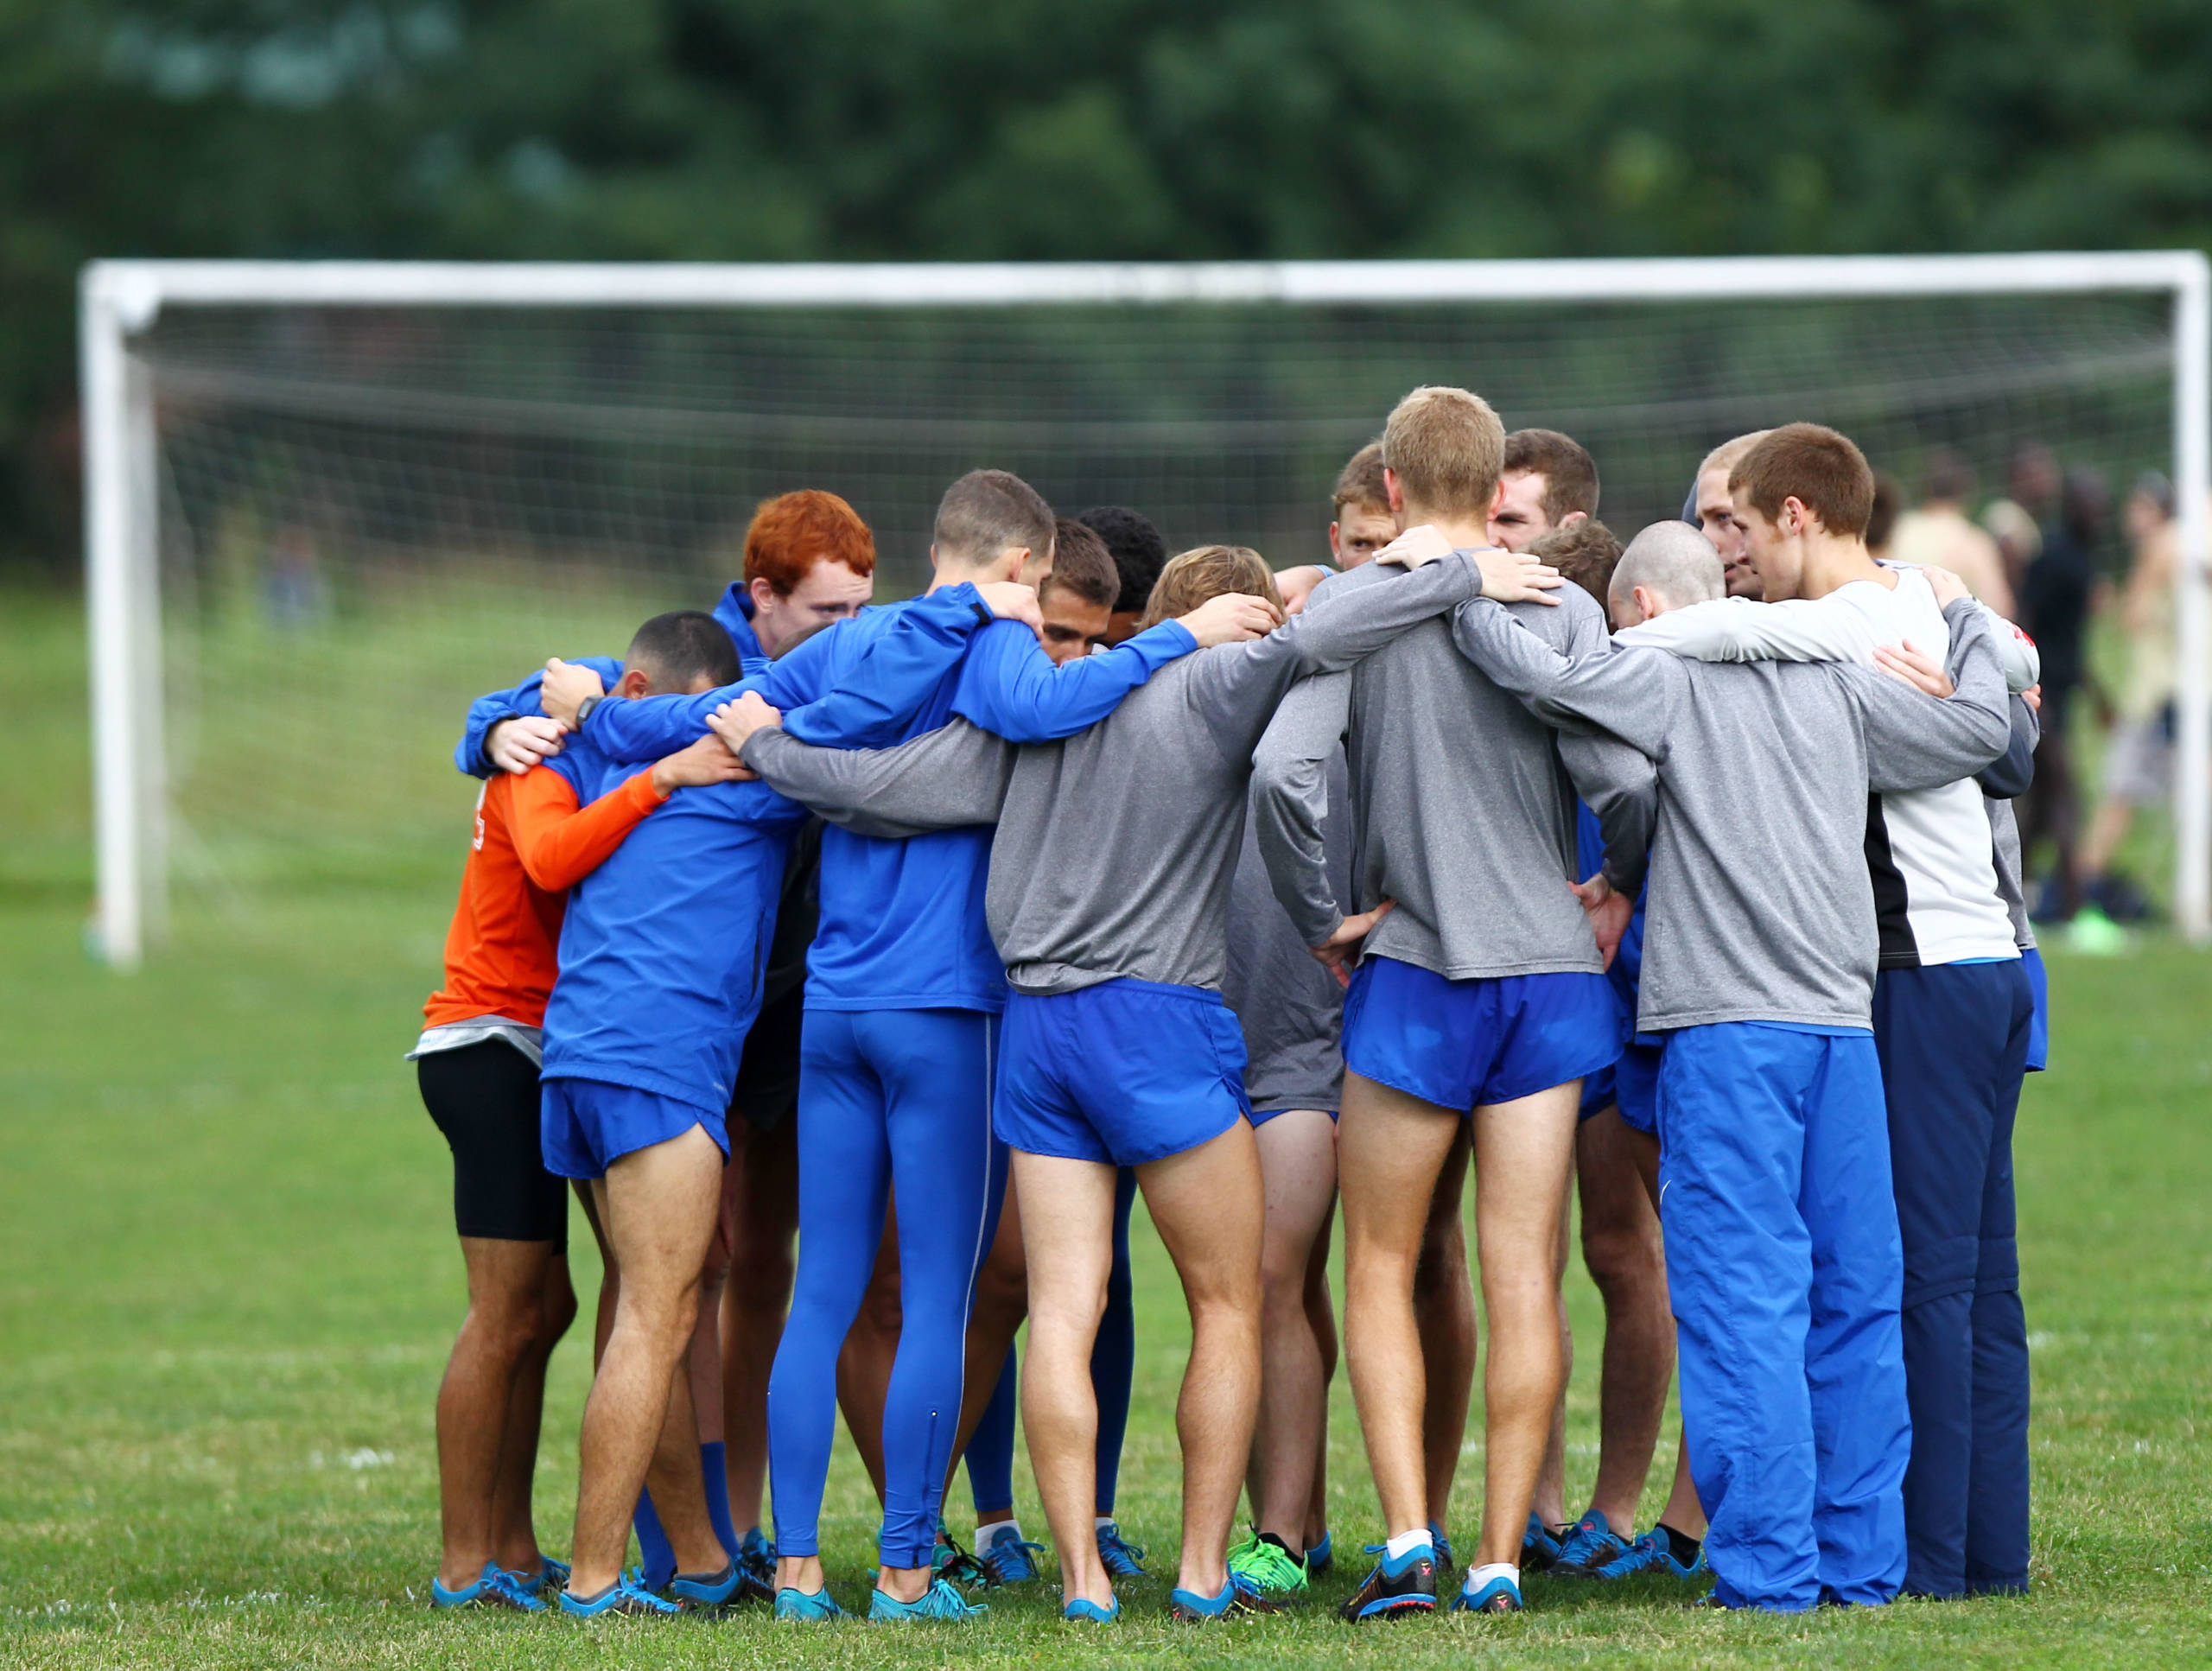 UK Cross Country Set for SEC Championships